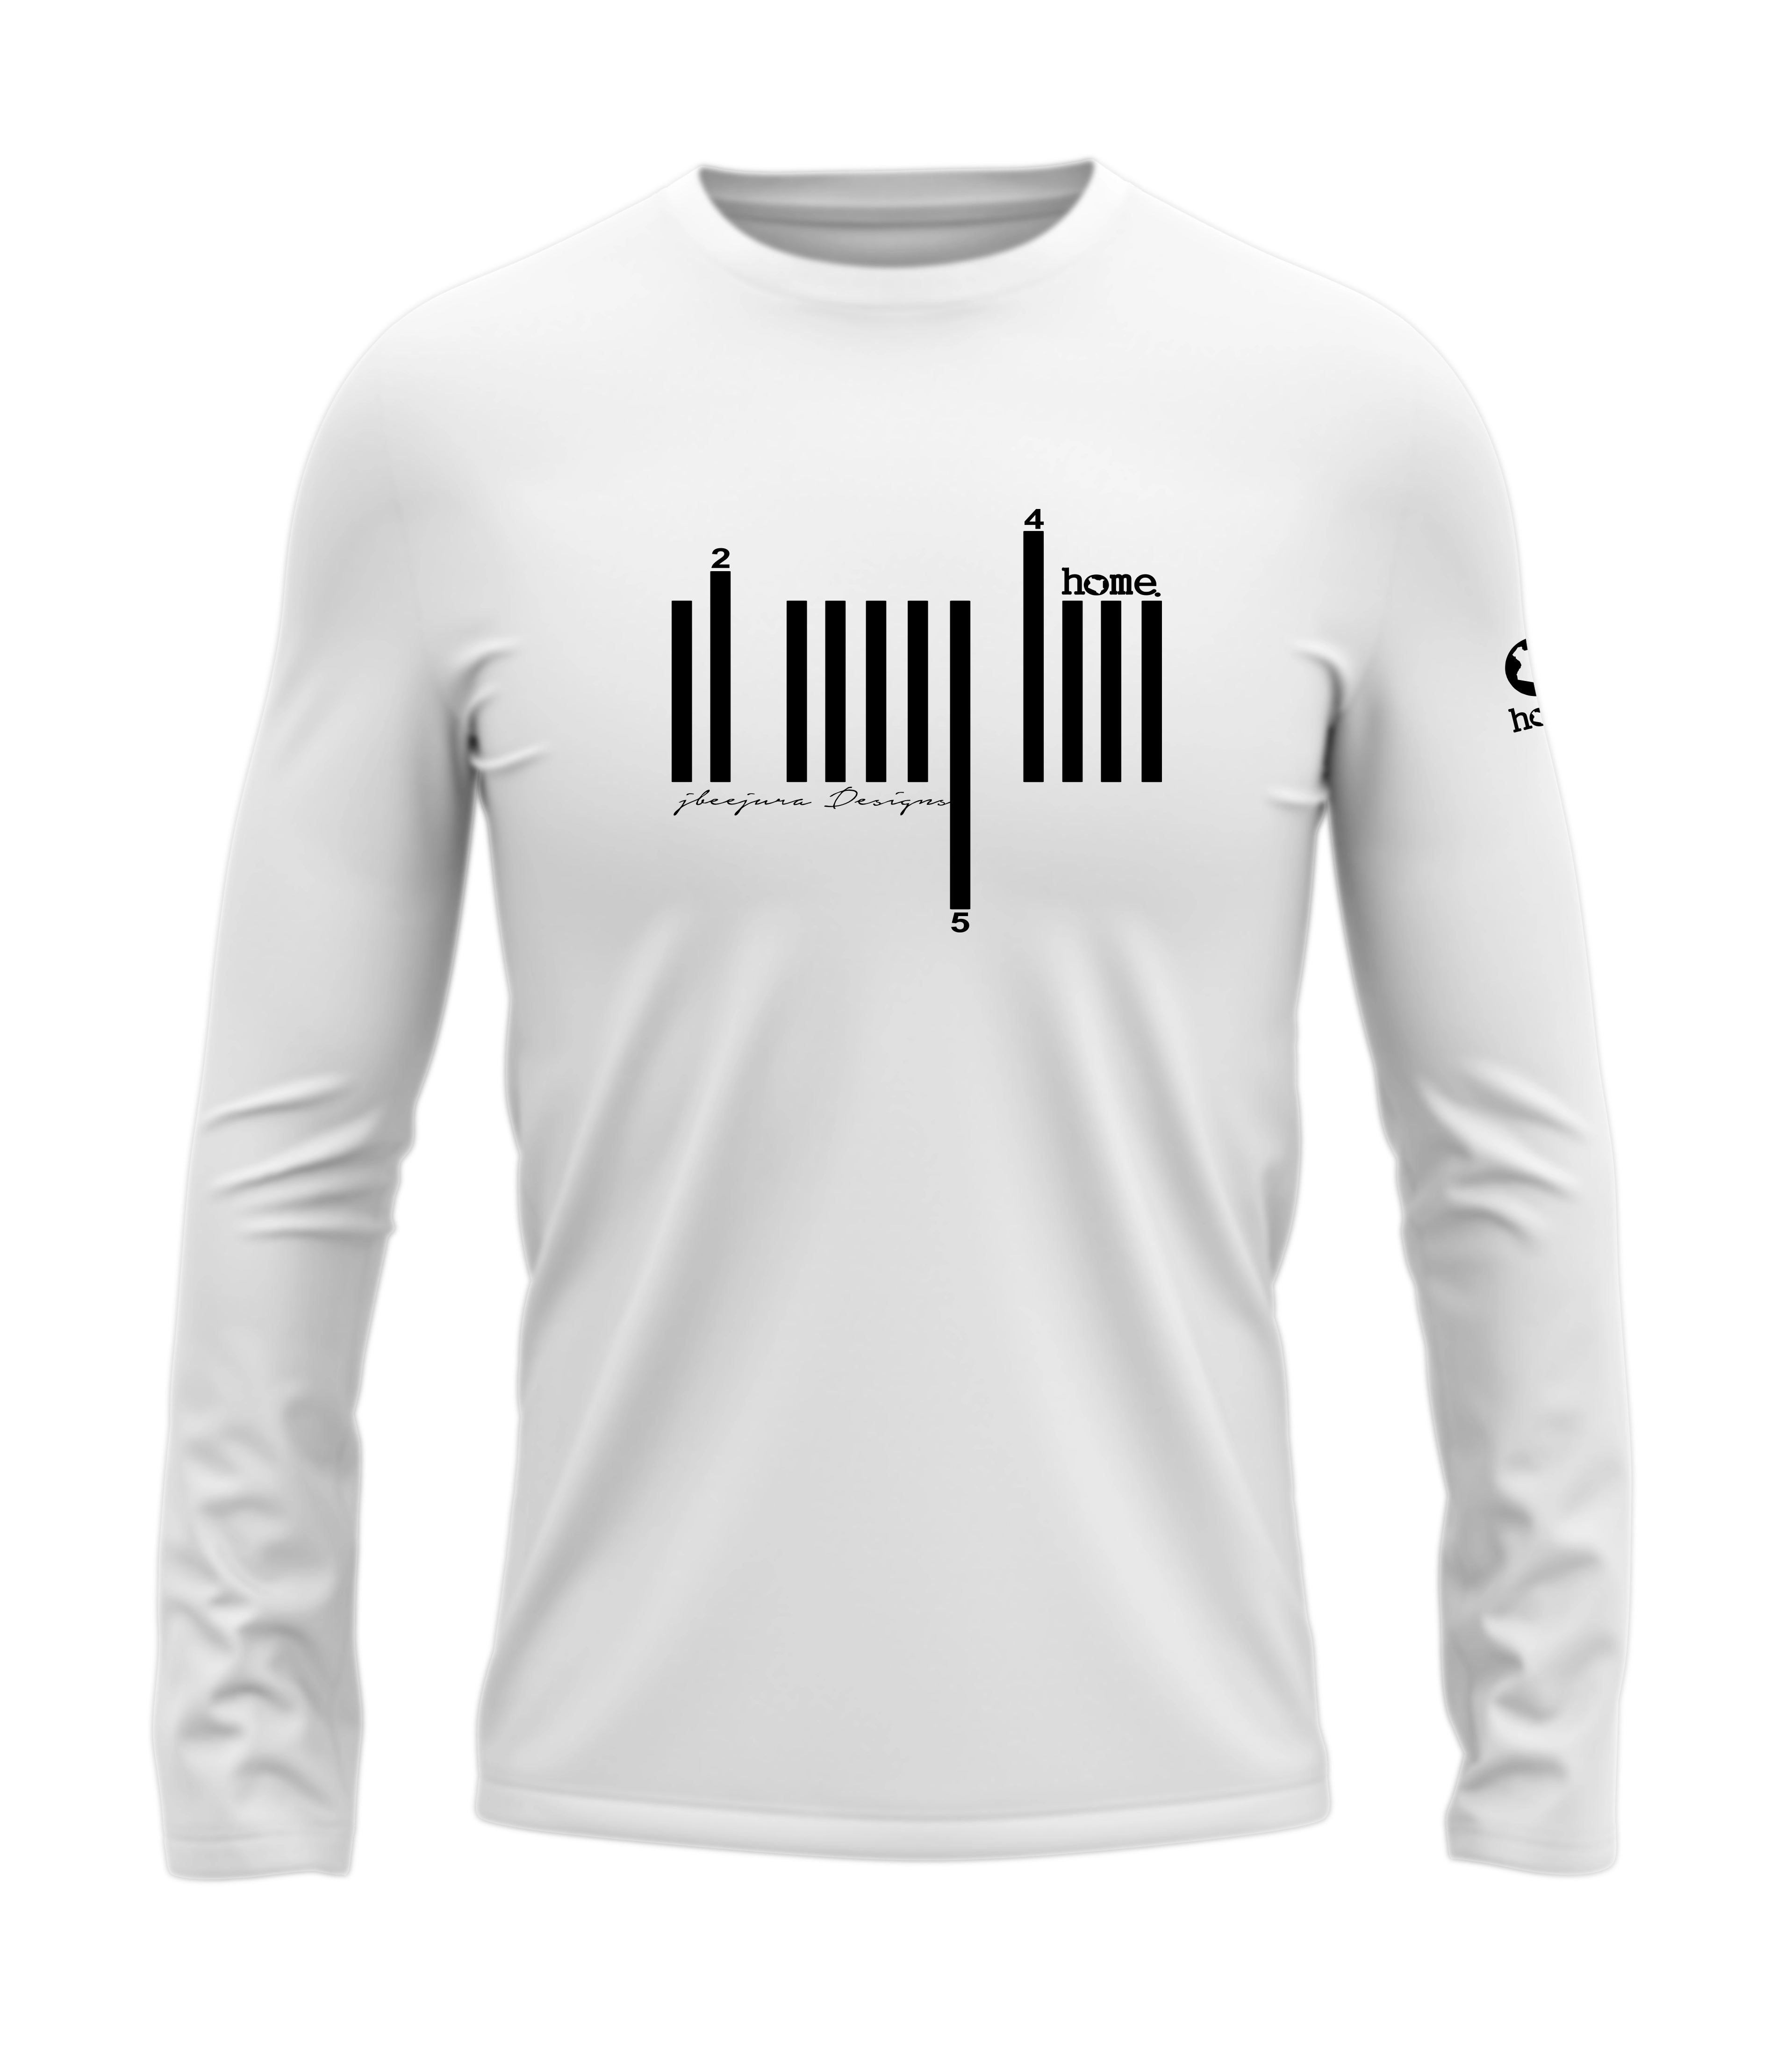 home_254 LONG-SLEEVED WHITE T-SHIRT WITH A BLACK BARS PRINT – COTTON PLUS FABRIC